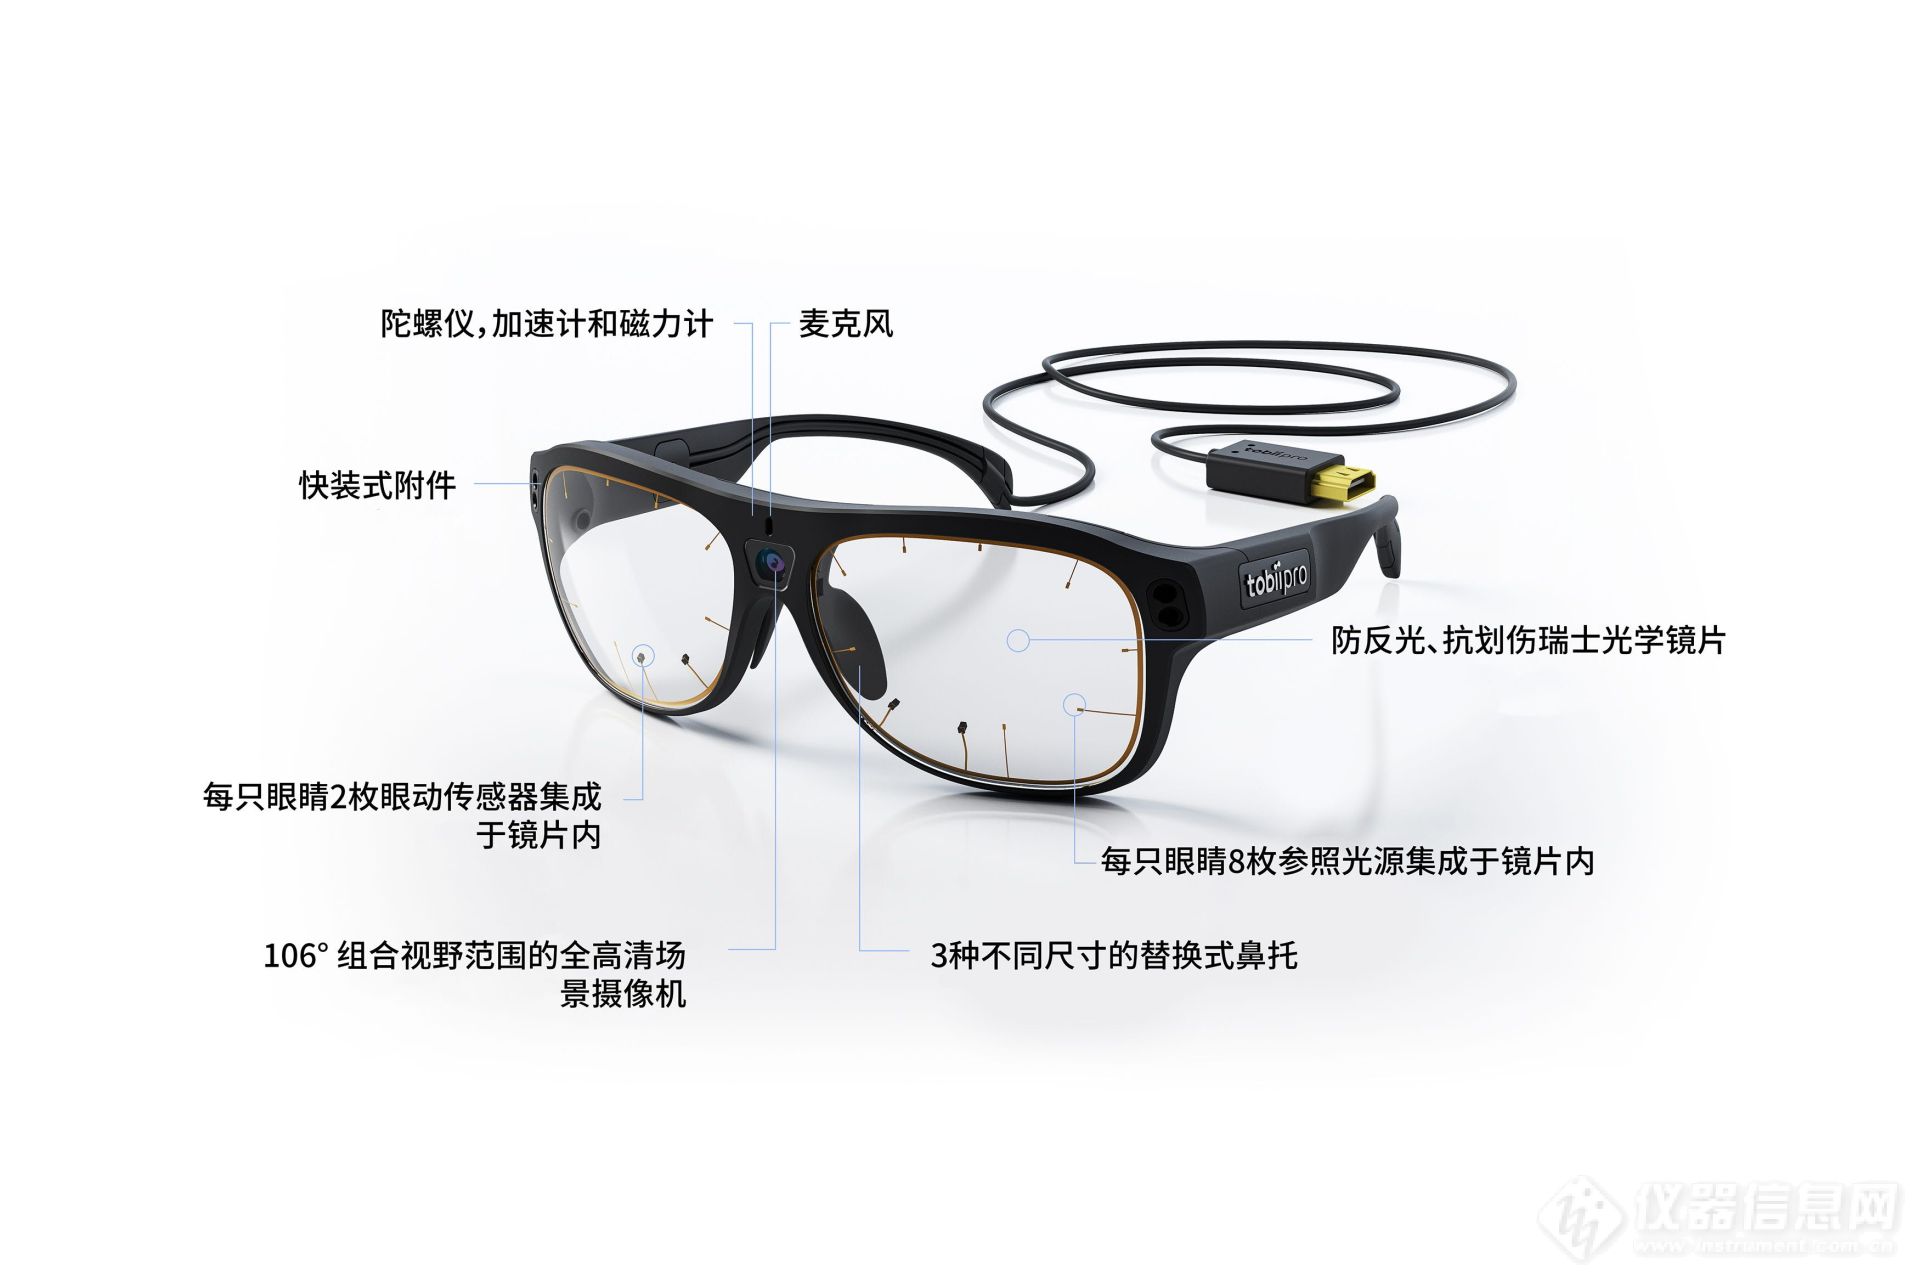 Tobii Pro Glasses 3 components - Chinese